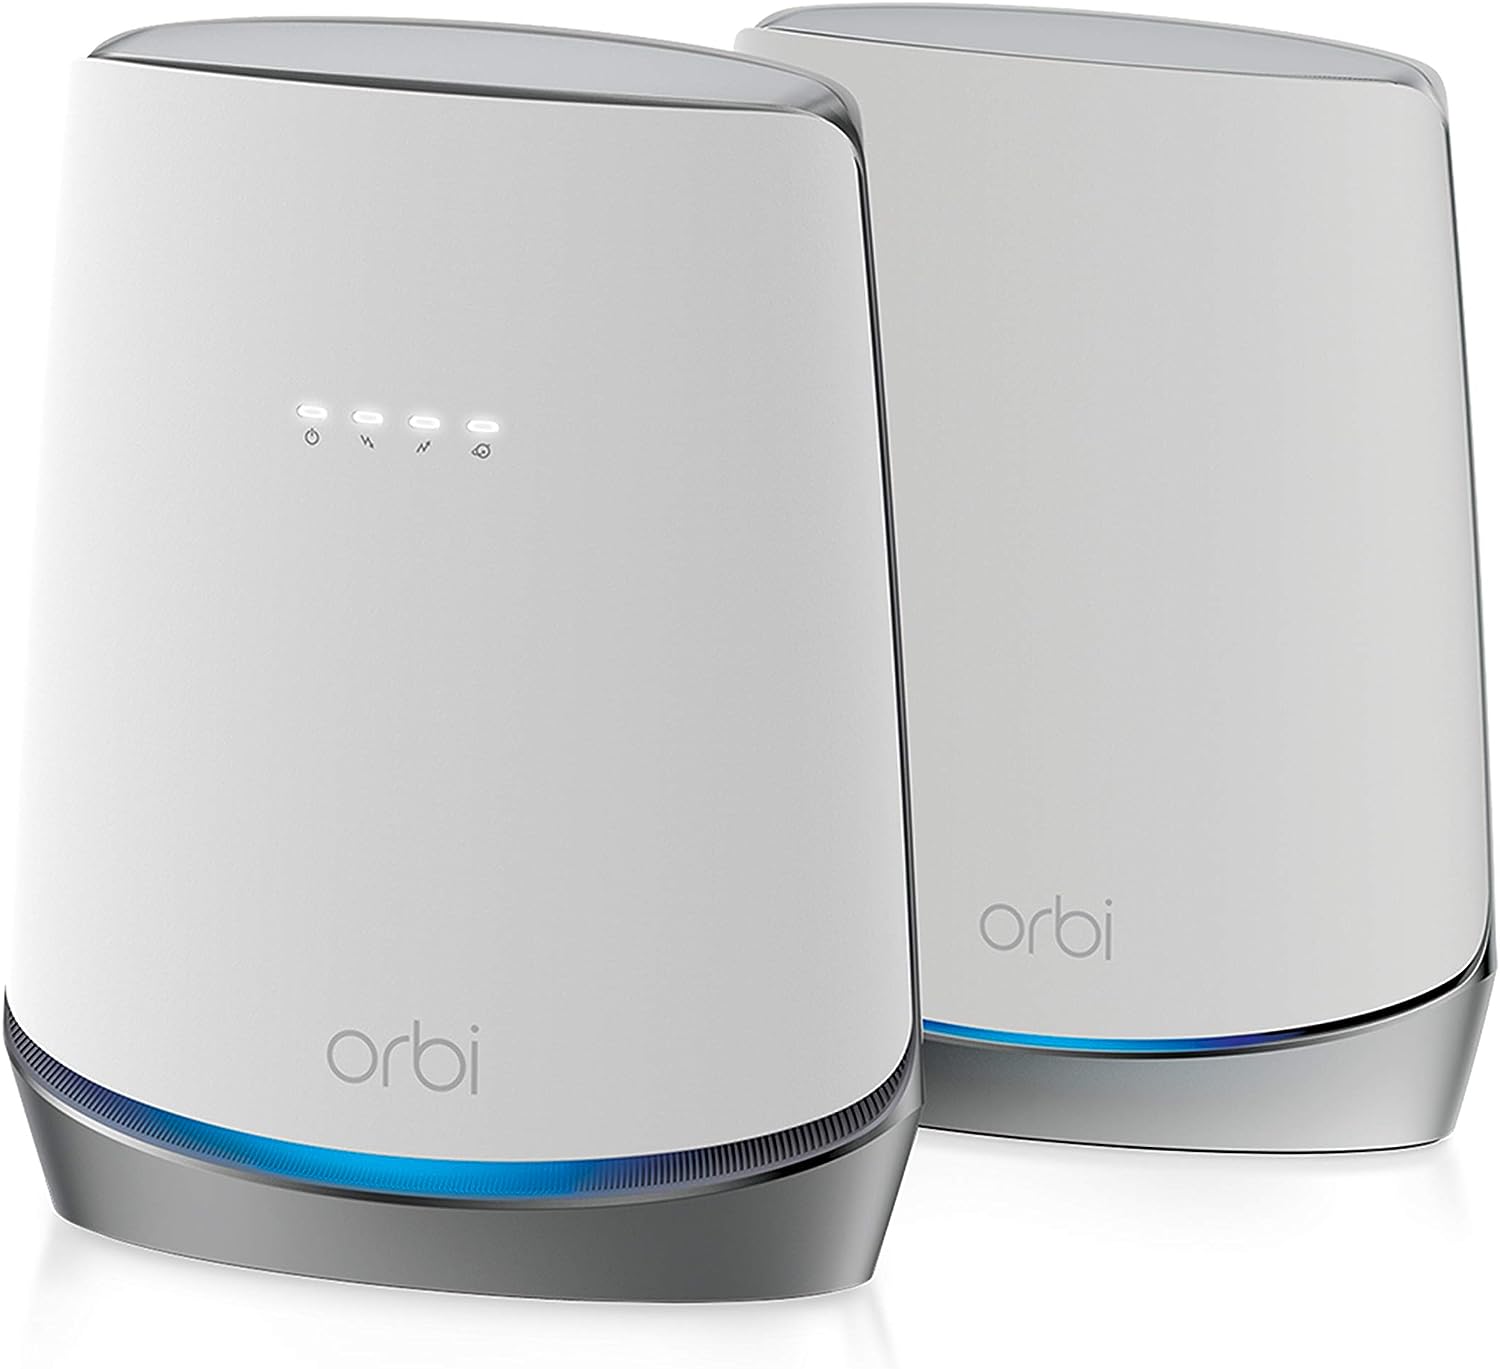 NETGEAR Orbi Whole Home WiFi 6 System with DOCSIS 3.1 Built-in Cable Modem - $455